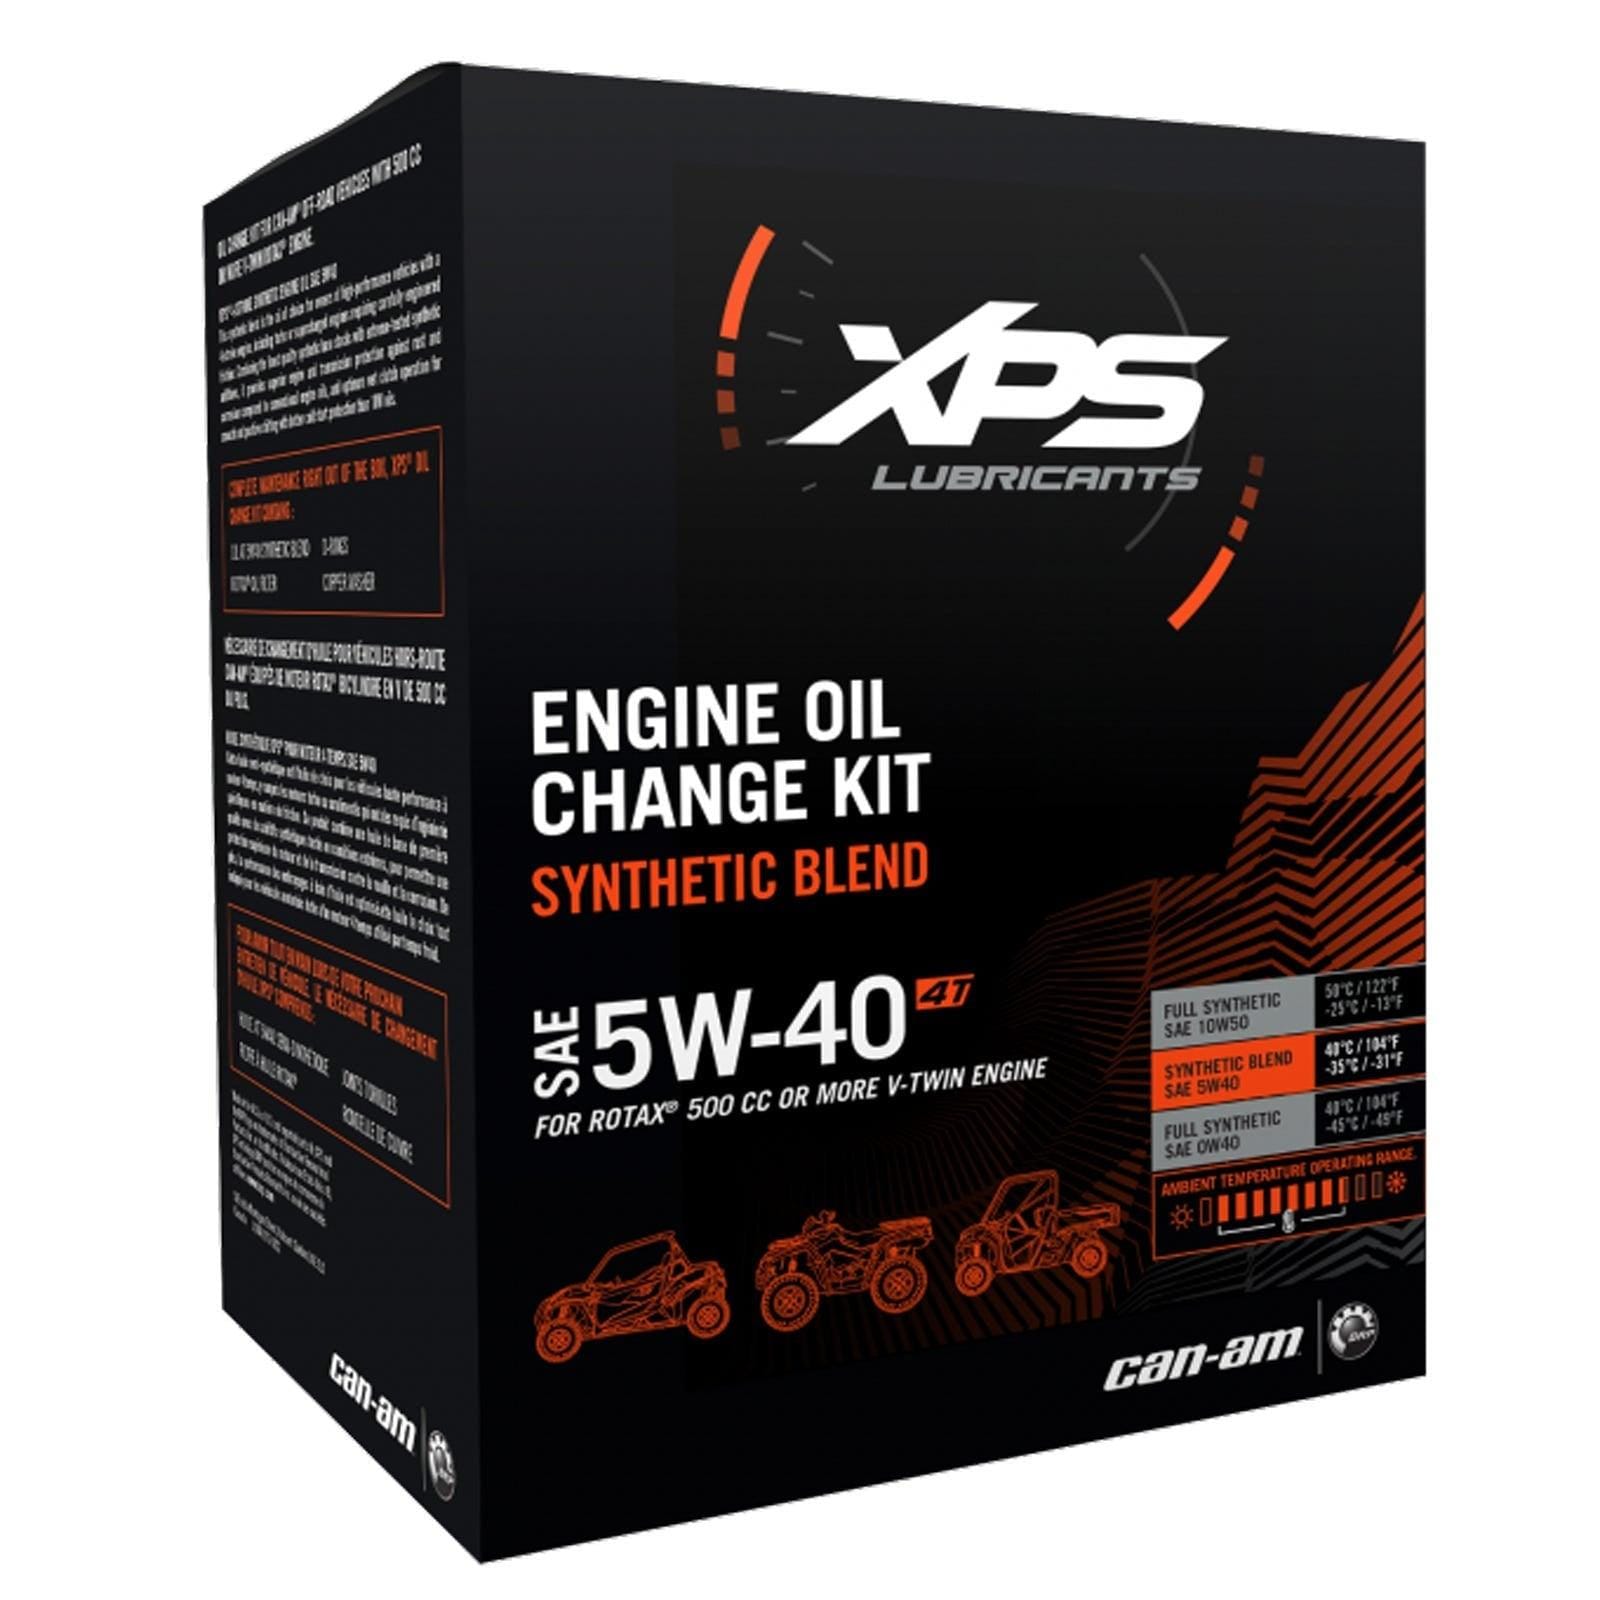 4T 5W-40 Synthetic Blend Oil Change Kit for Rotax 500 cc or more V-Twin engine - Factory Recreation